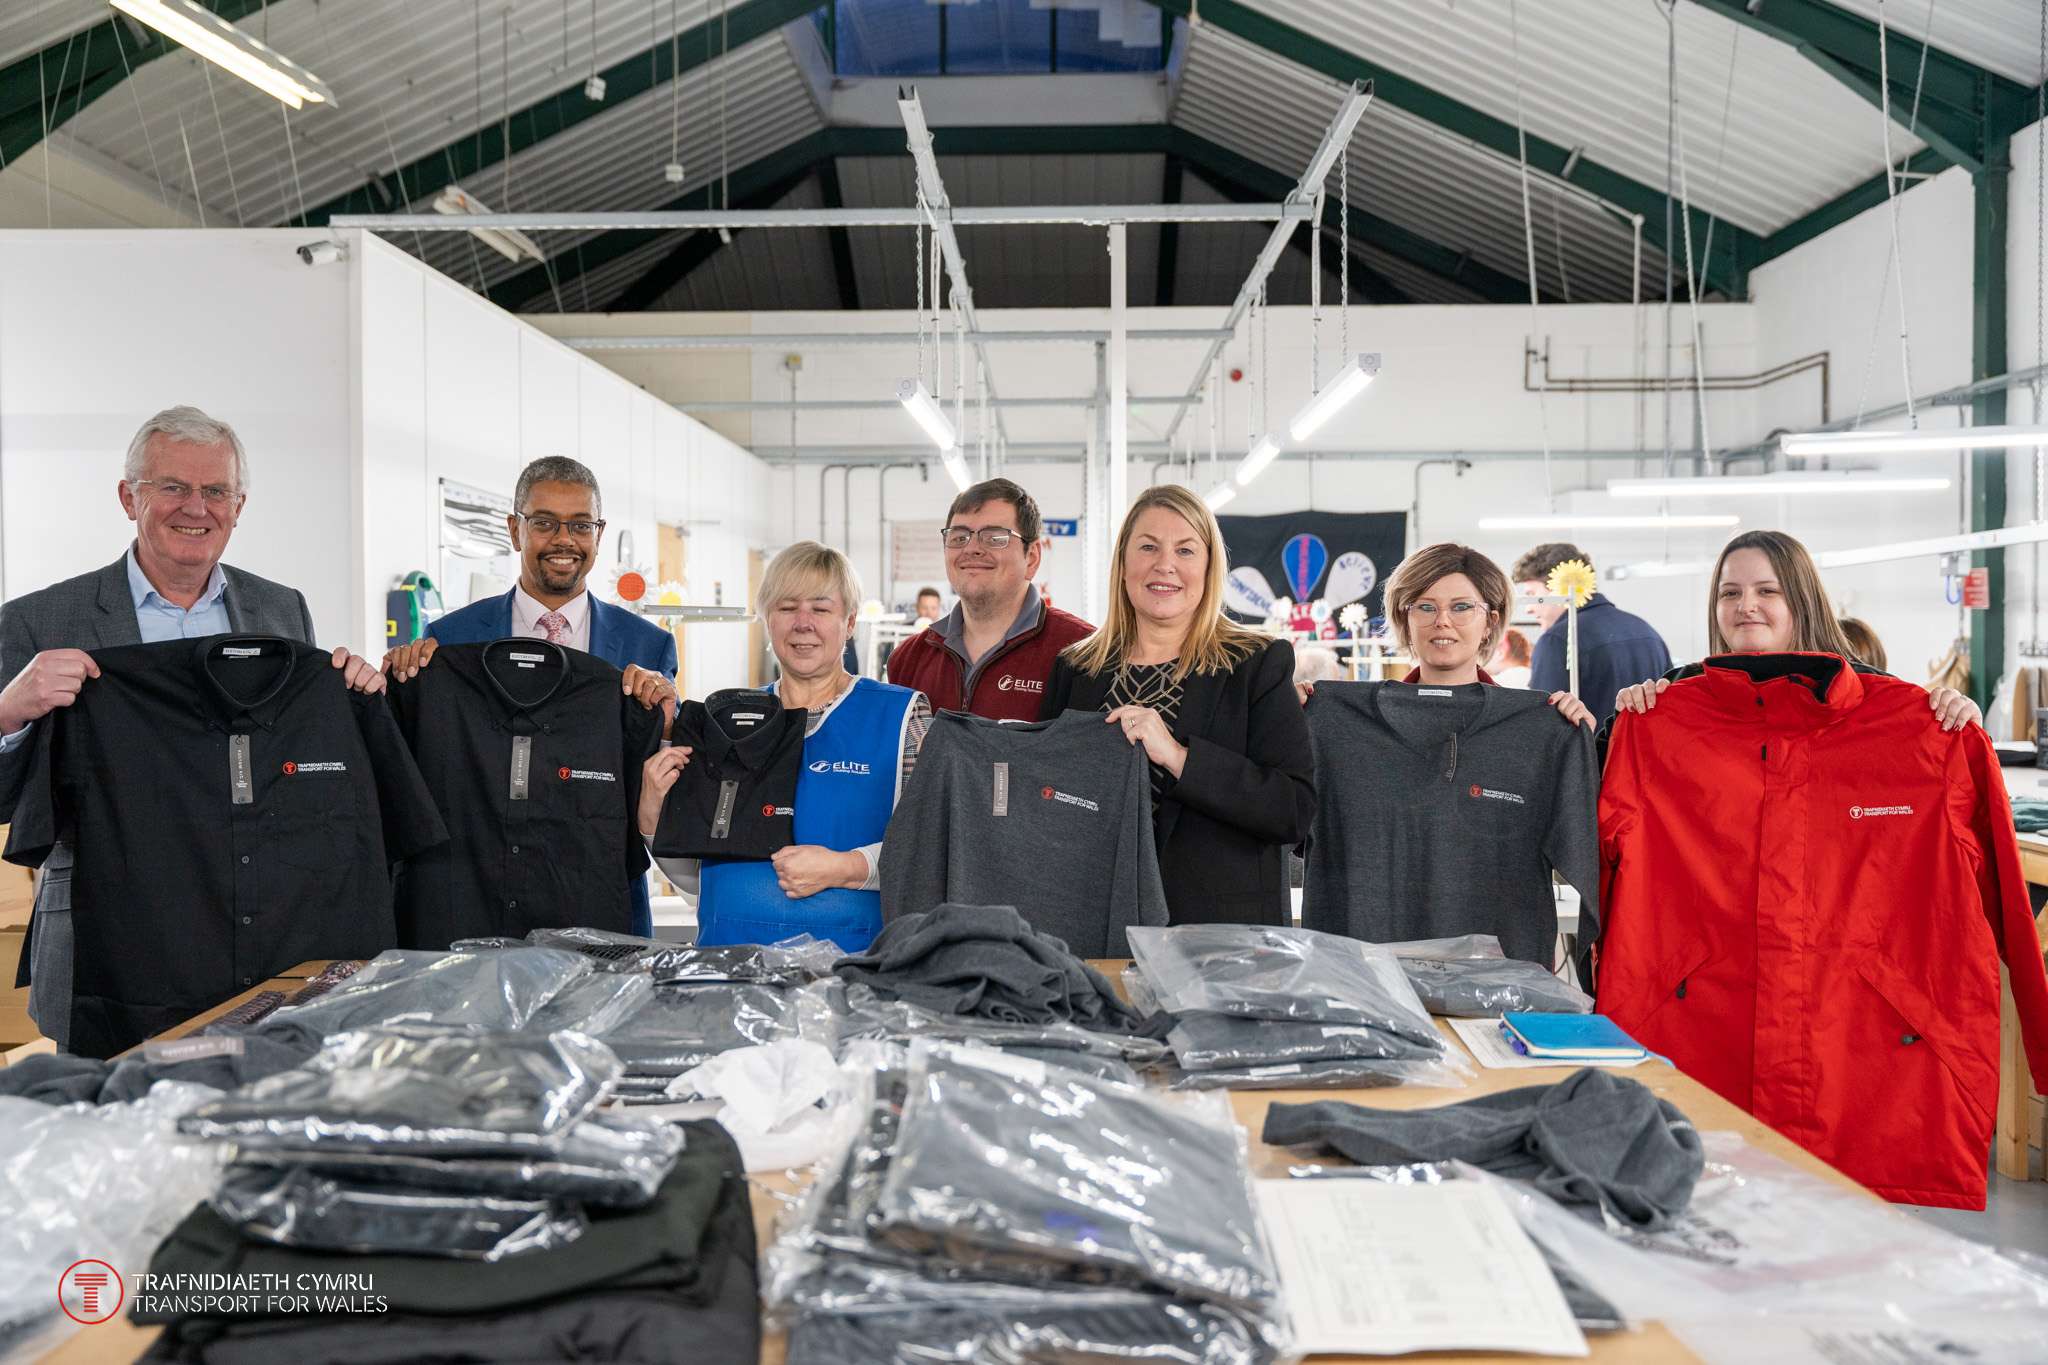 Transport for Wales award clothing company £2.5million after four years of producing staff uniforms